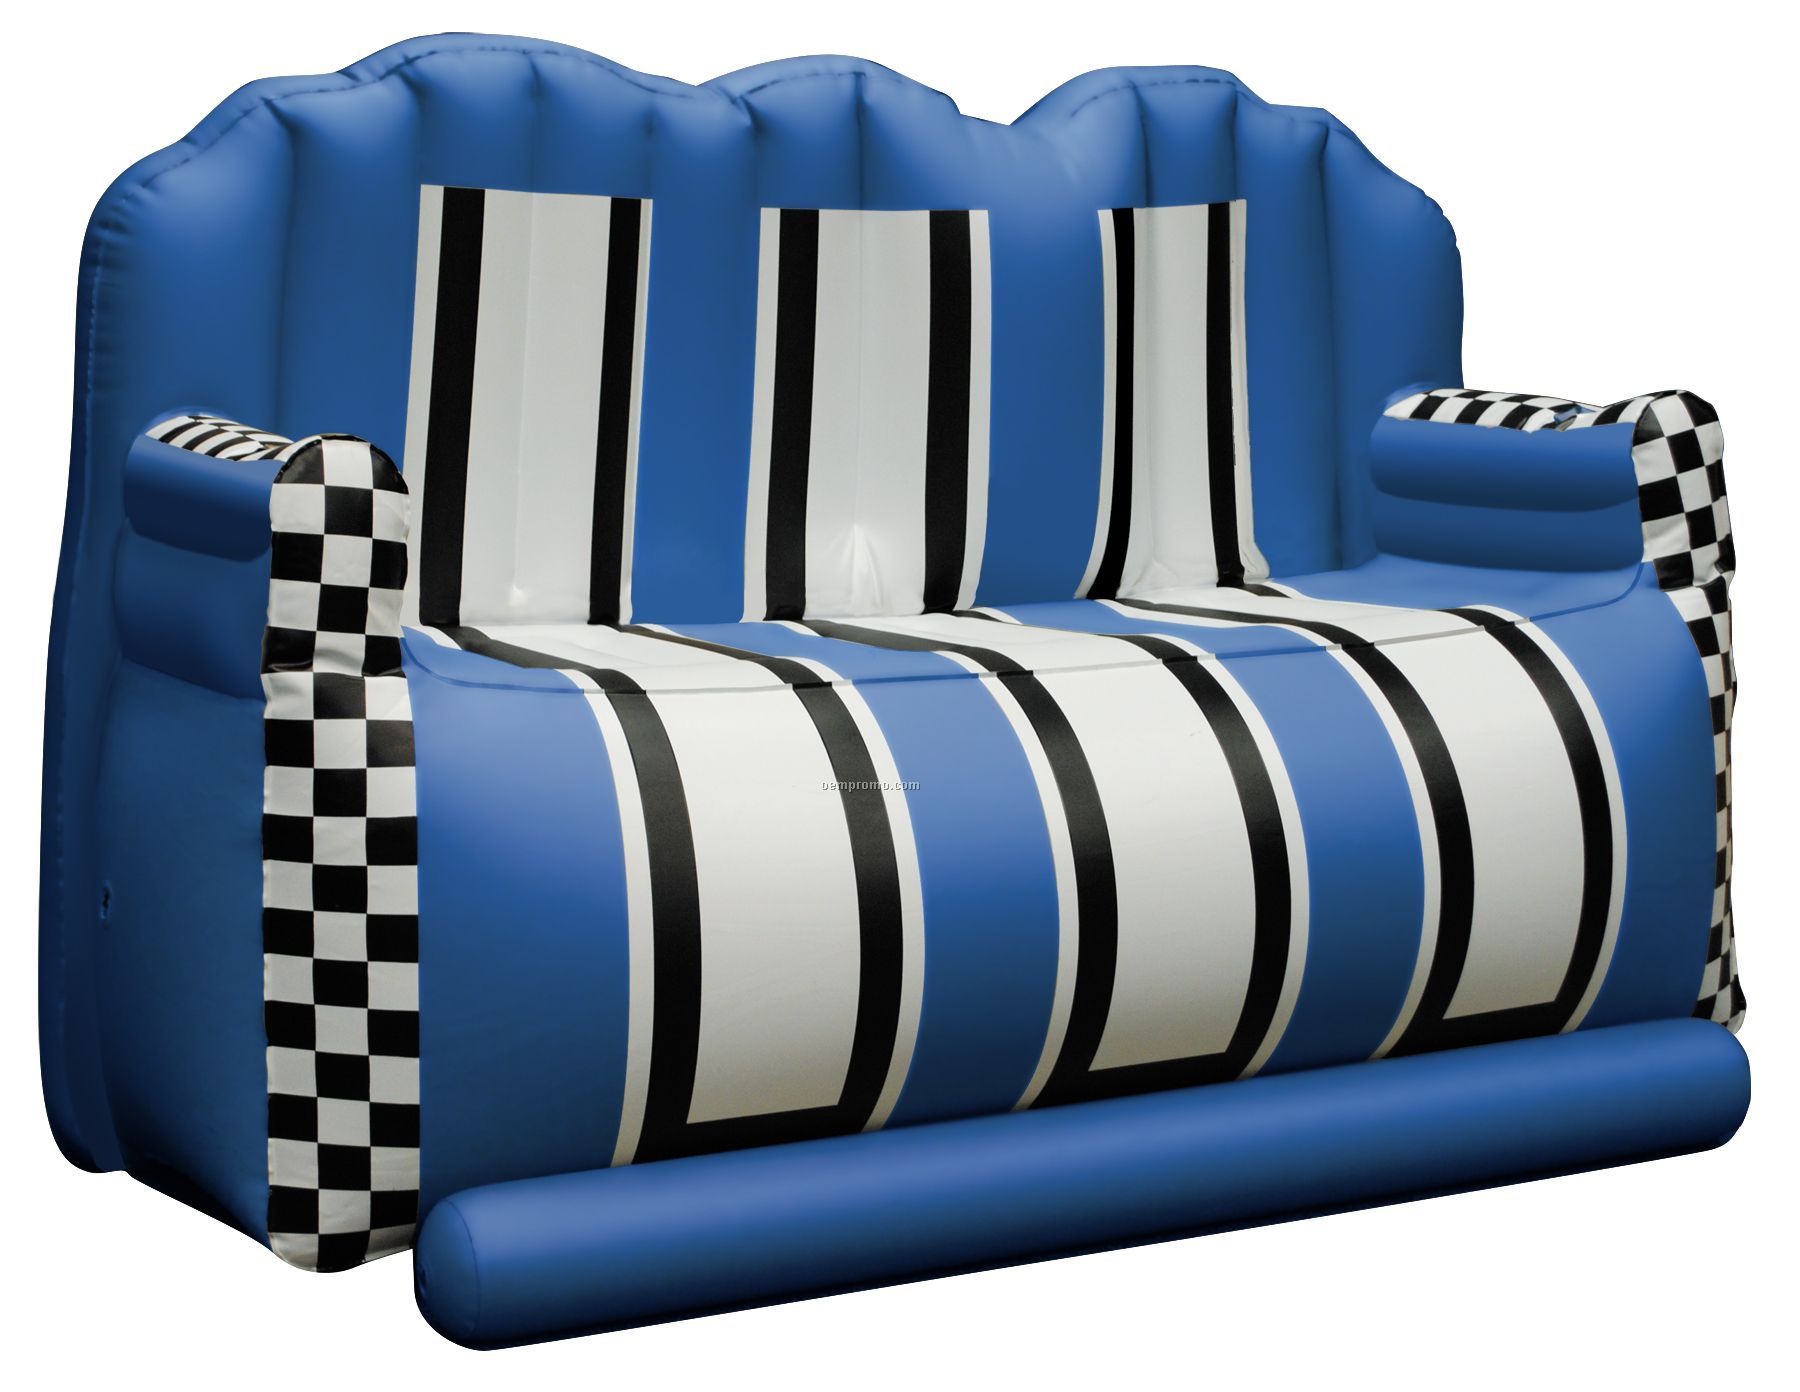 Inflate-a-seat "Couch": Blue/White/Black With Checkered Arms